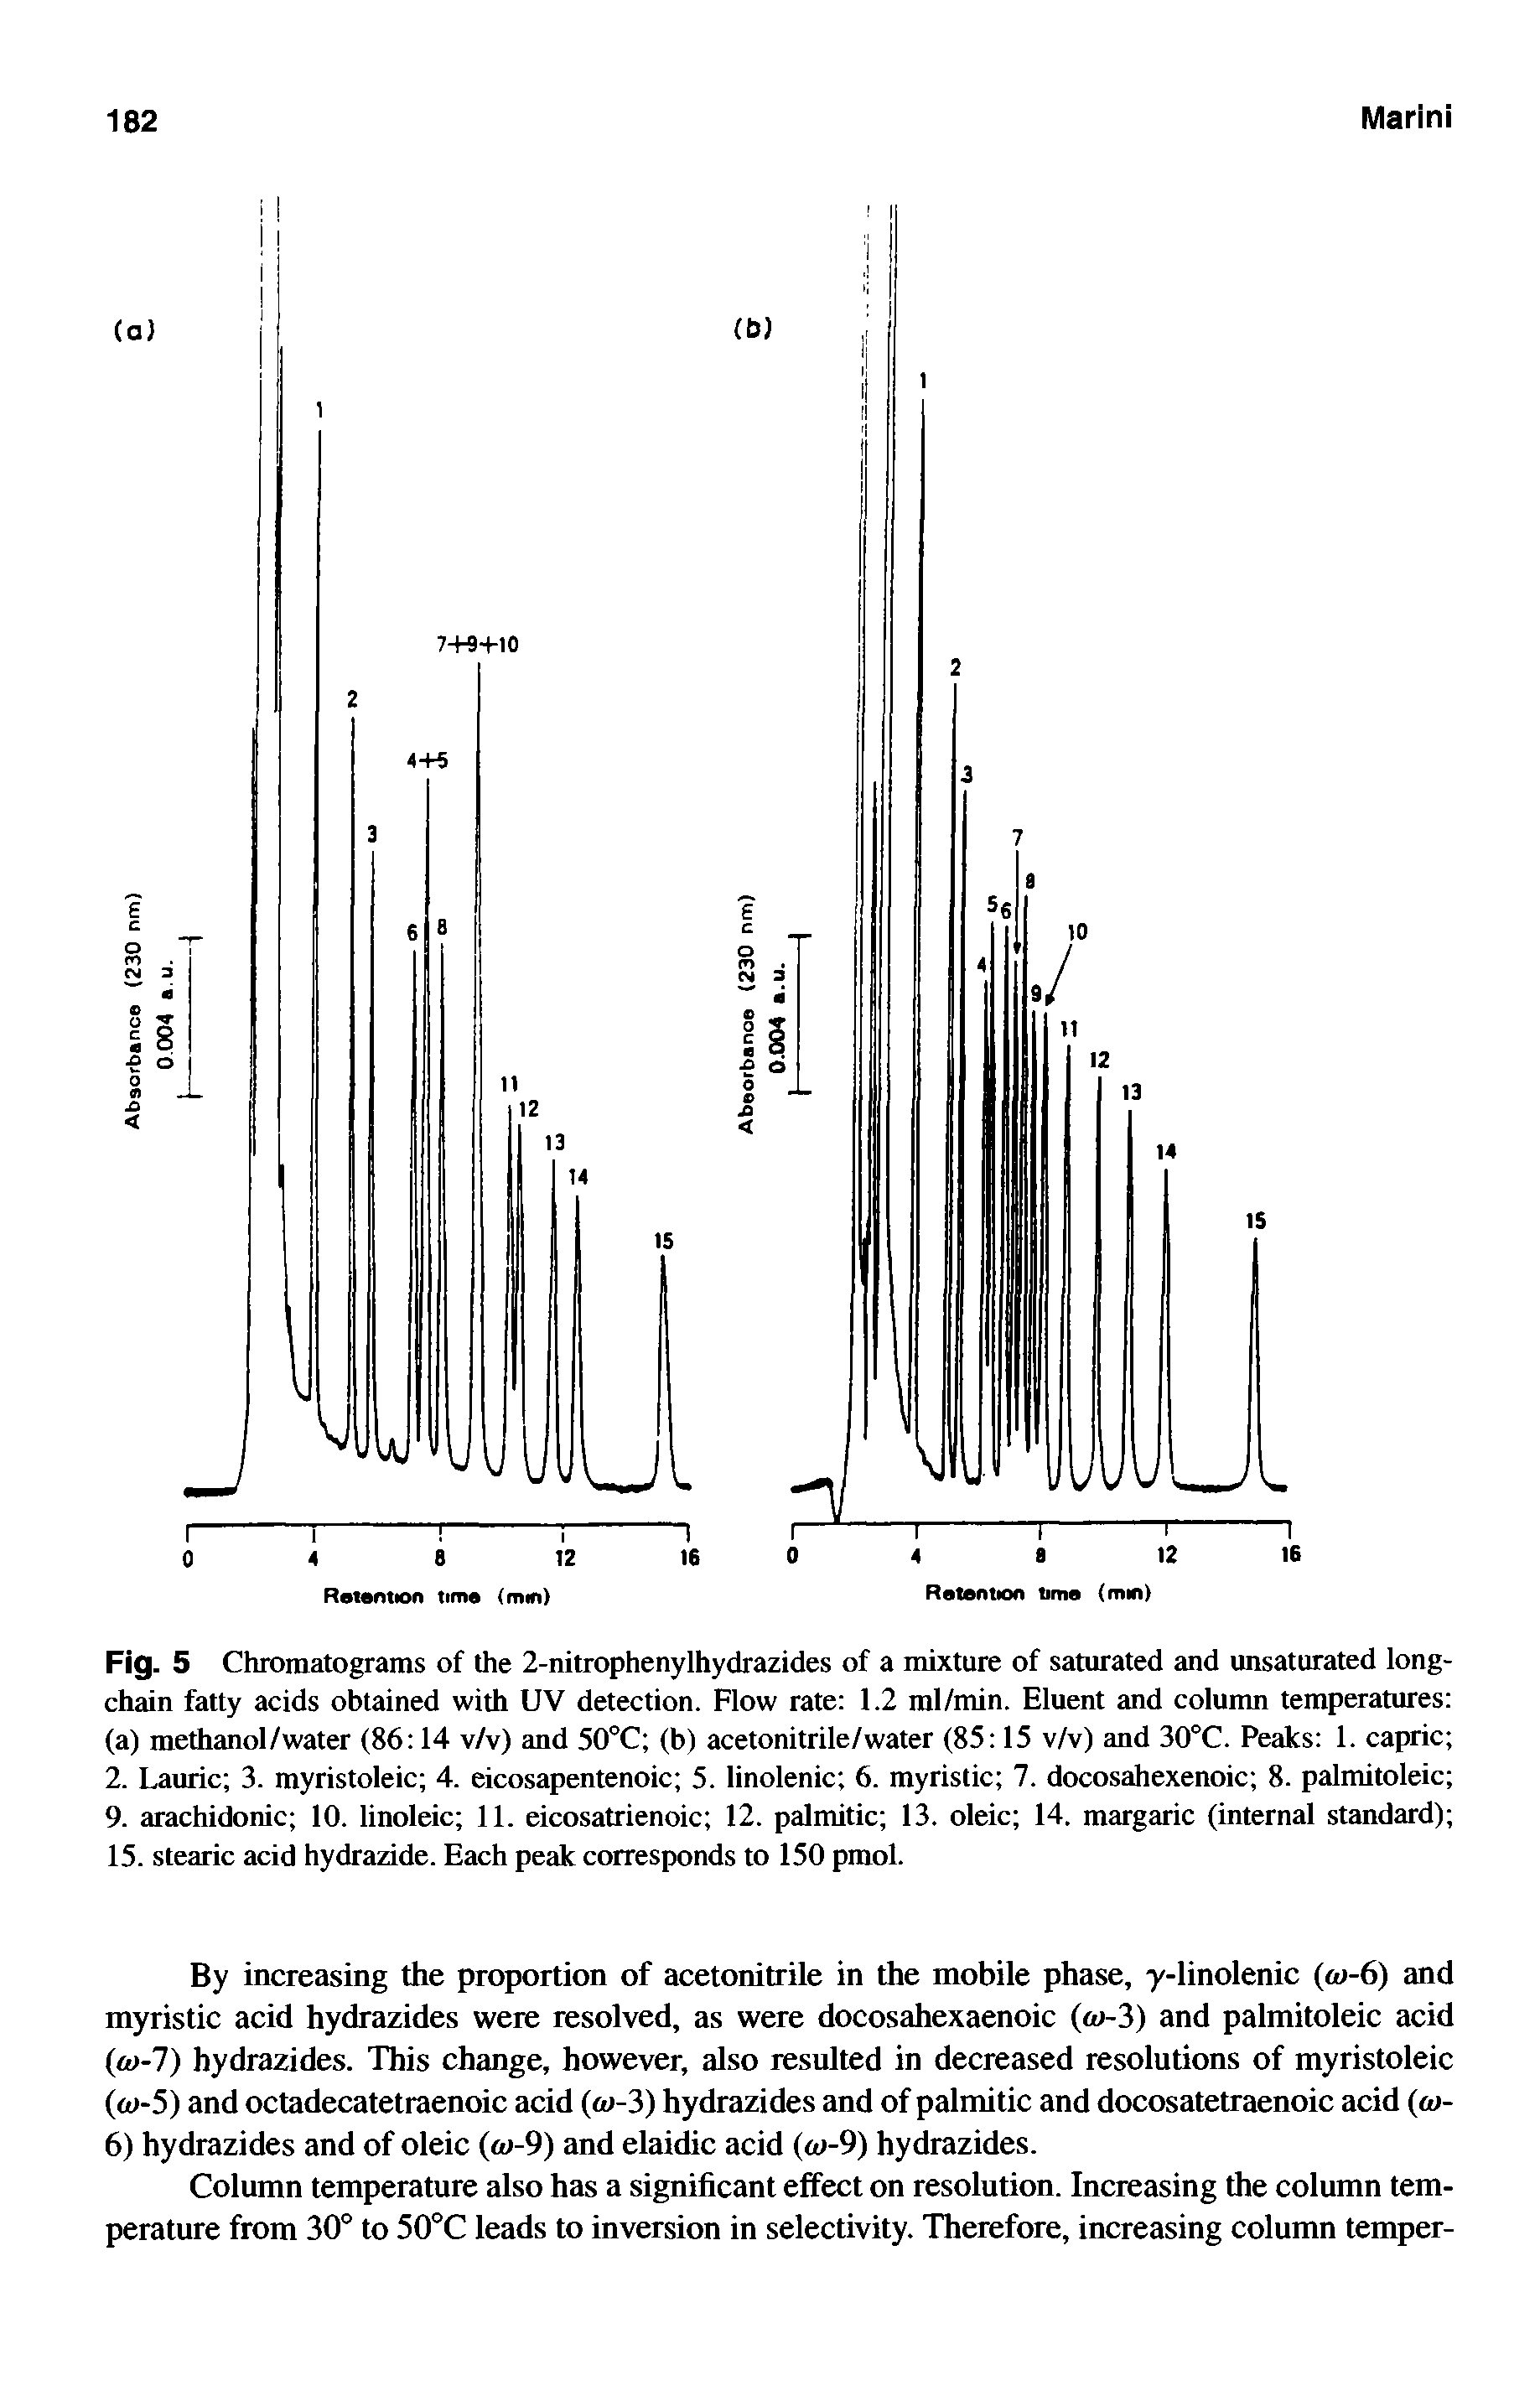 Fig. 5 Chromatograms of the 2-nitrophenylhydrazides of a mixture of saturated and unsaturated long-chain fatty acids obtained with UV detection. Flow rate 1.2 ml/min. Eluent and column temperatures (a) methanol/water (86 14 v/v) and 50°C (b) acetonitrile/water (85 15 v/v) and 30°C. Peaks 1. capric 2. Laurie 3. myristoleic 4. eicosapentenoic 5. linolenic 6. myristic 7. docosahexenoic 8. palmitoleic 9. arachidonic 10. linoleic 11. eicosatrienoic 12. palmitic 13. oleic 14. margaric (internal standard) 15. stearic acid hydrazide. Each peak corresponds to 150 pmol.